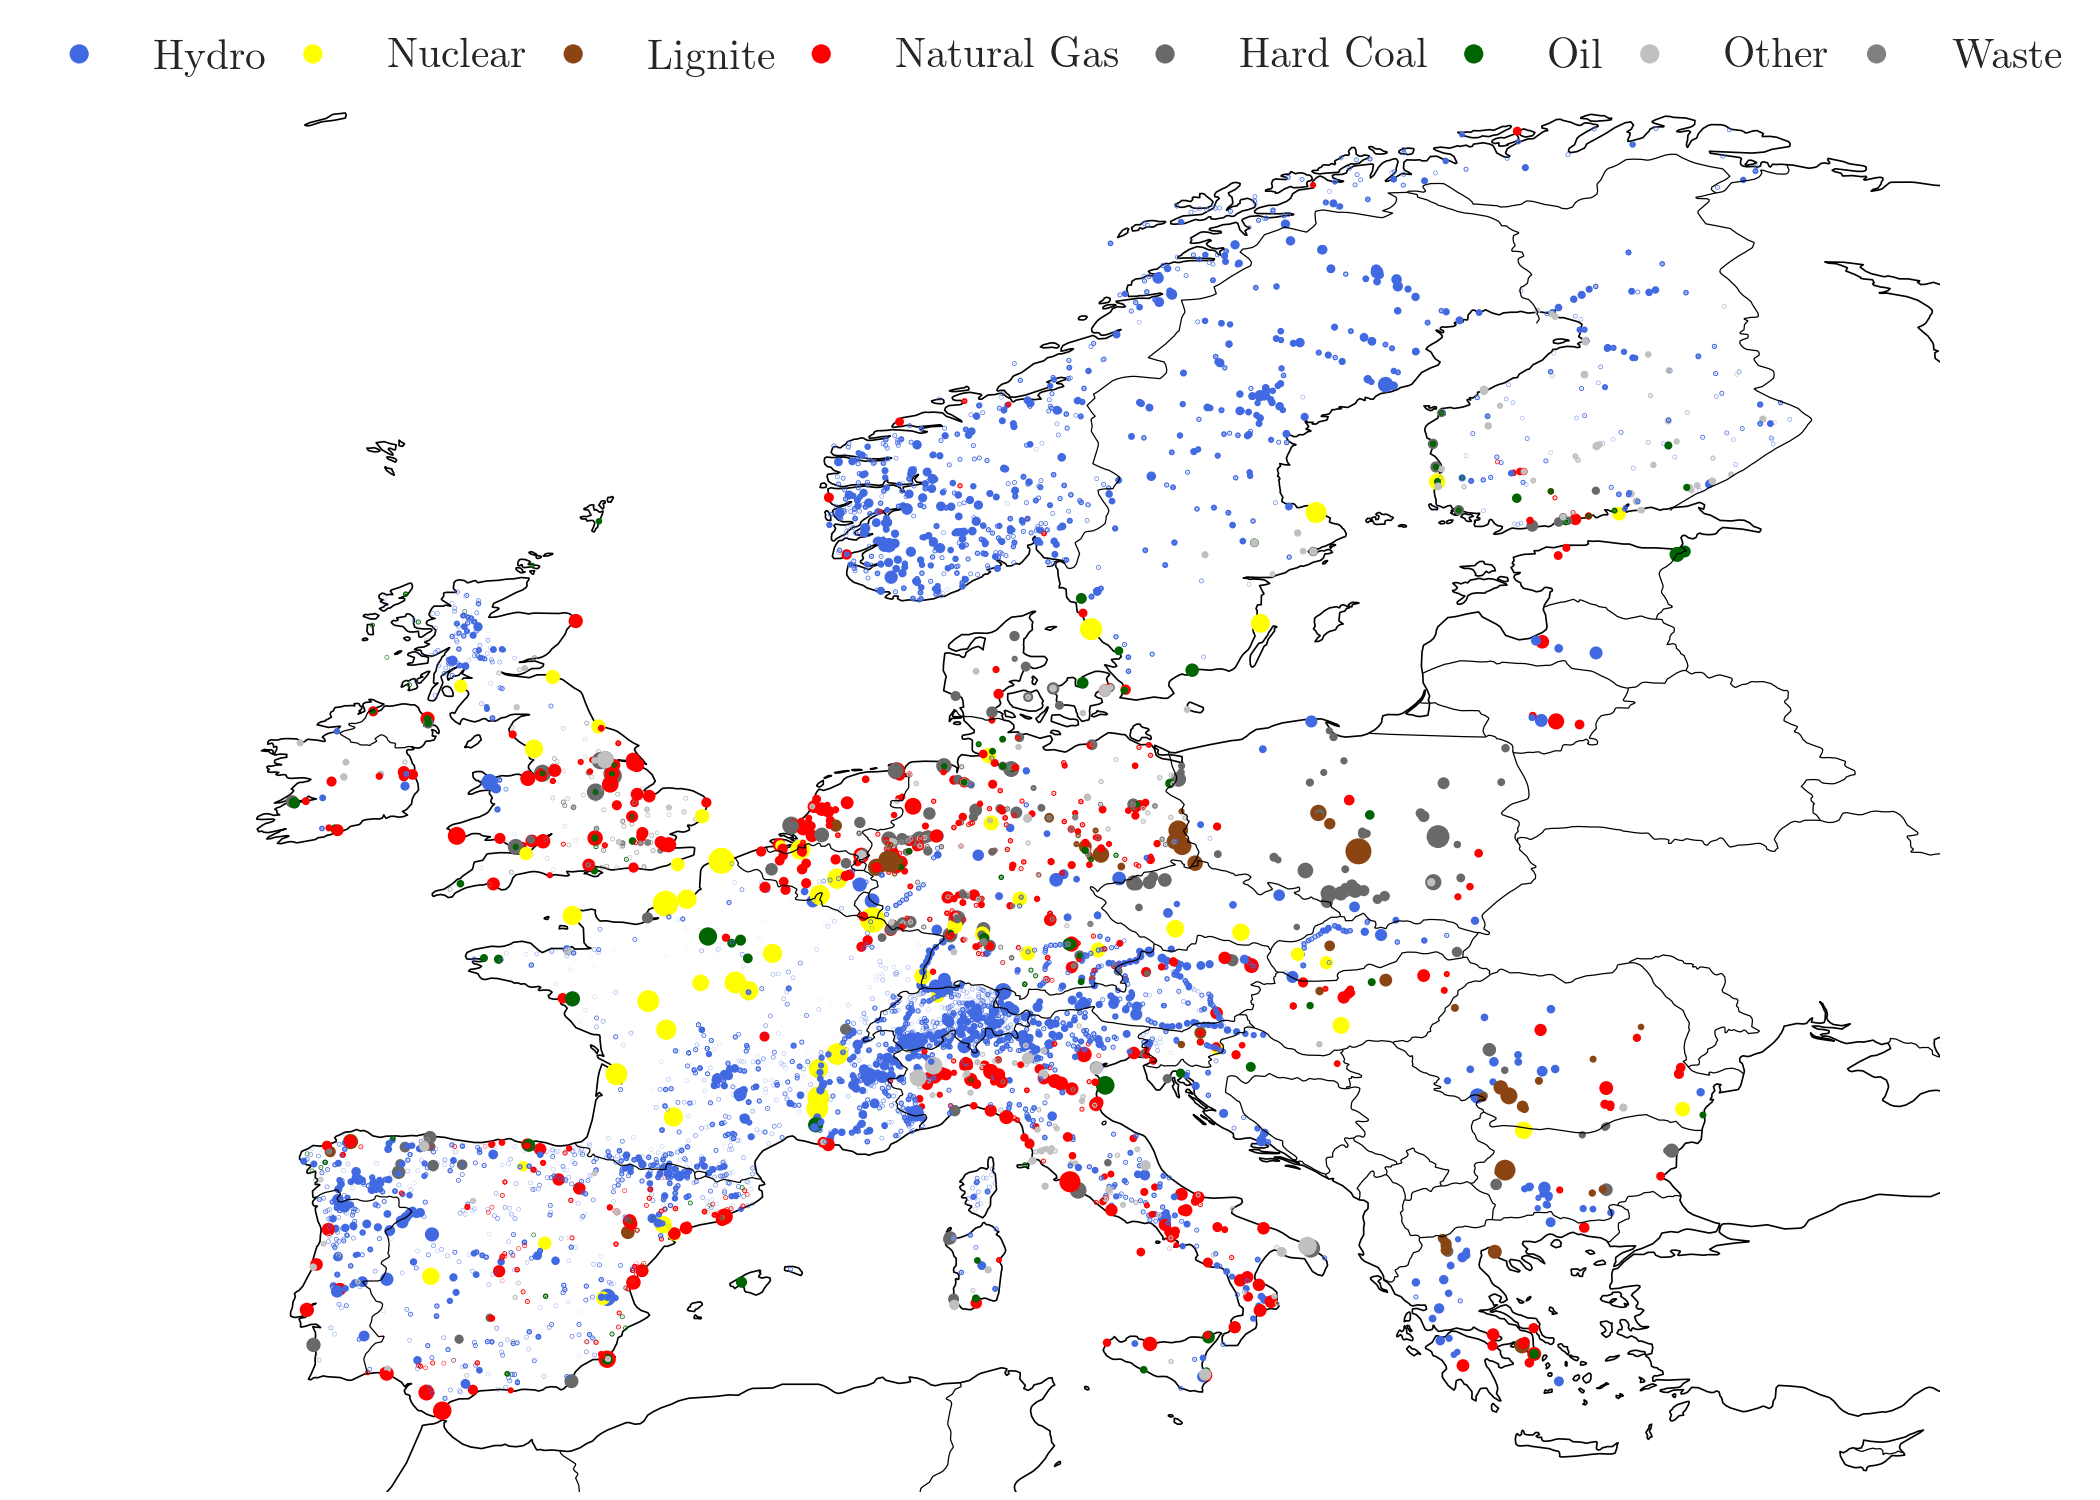 Map of power plants in Europe